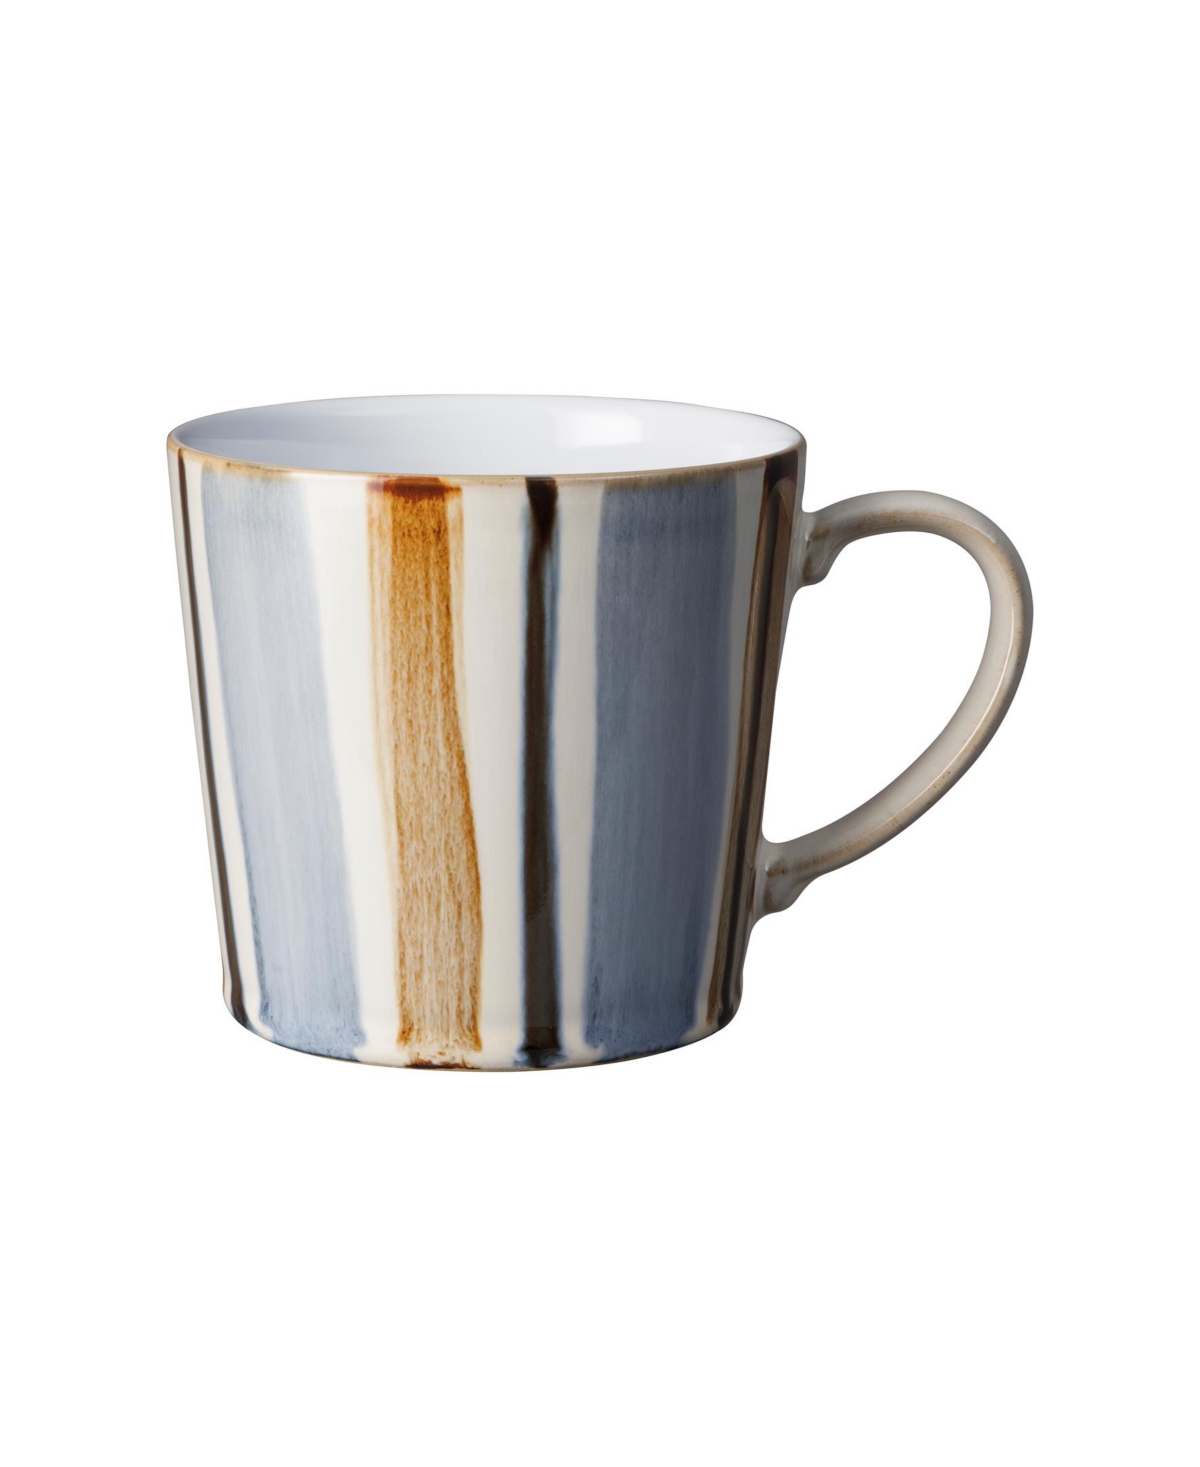 Brown Stripe Painted Large Mug - Multi Colored And Hand Painted